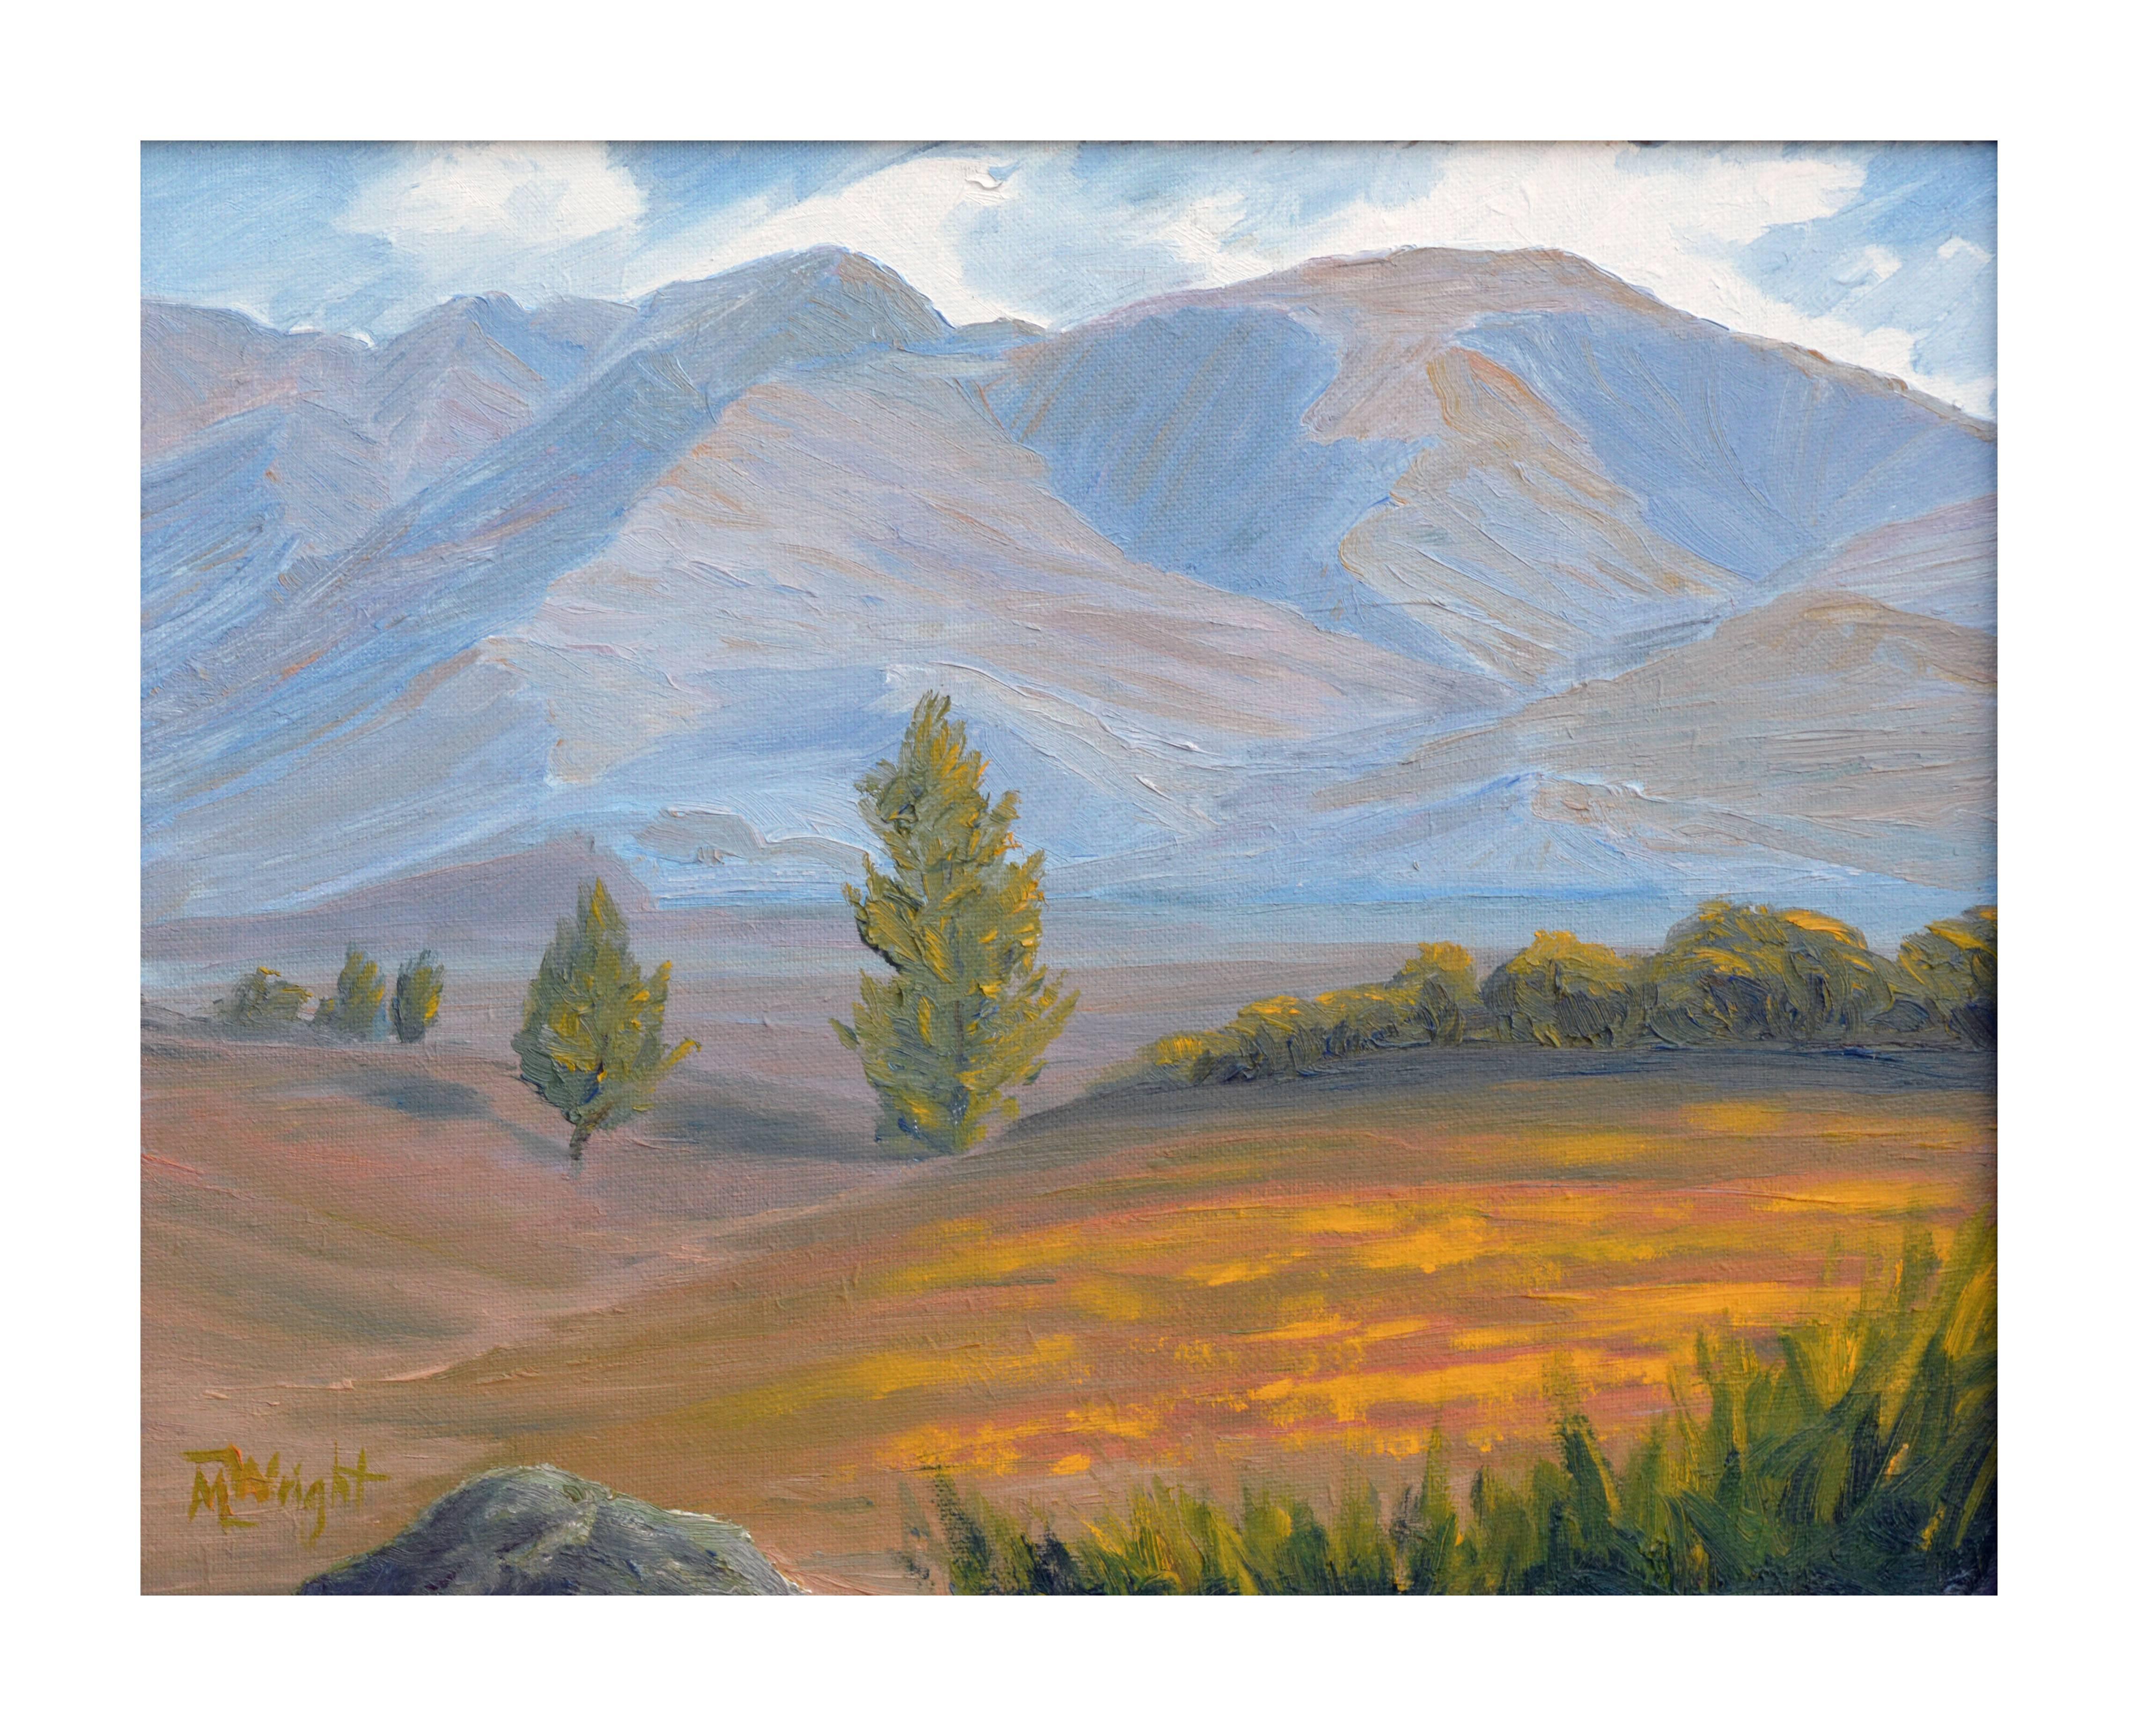 Desert Poppies - Painting by Mike Wright